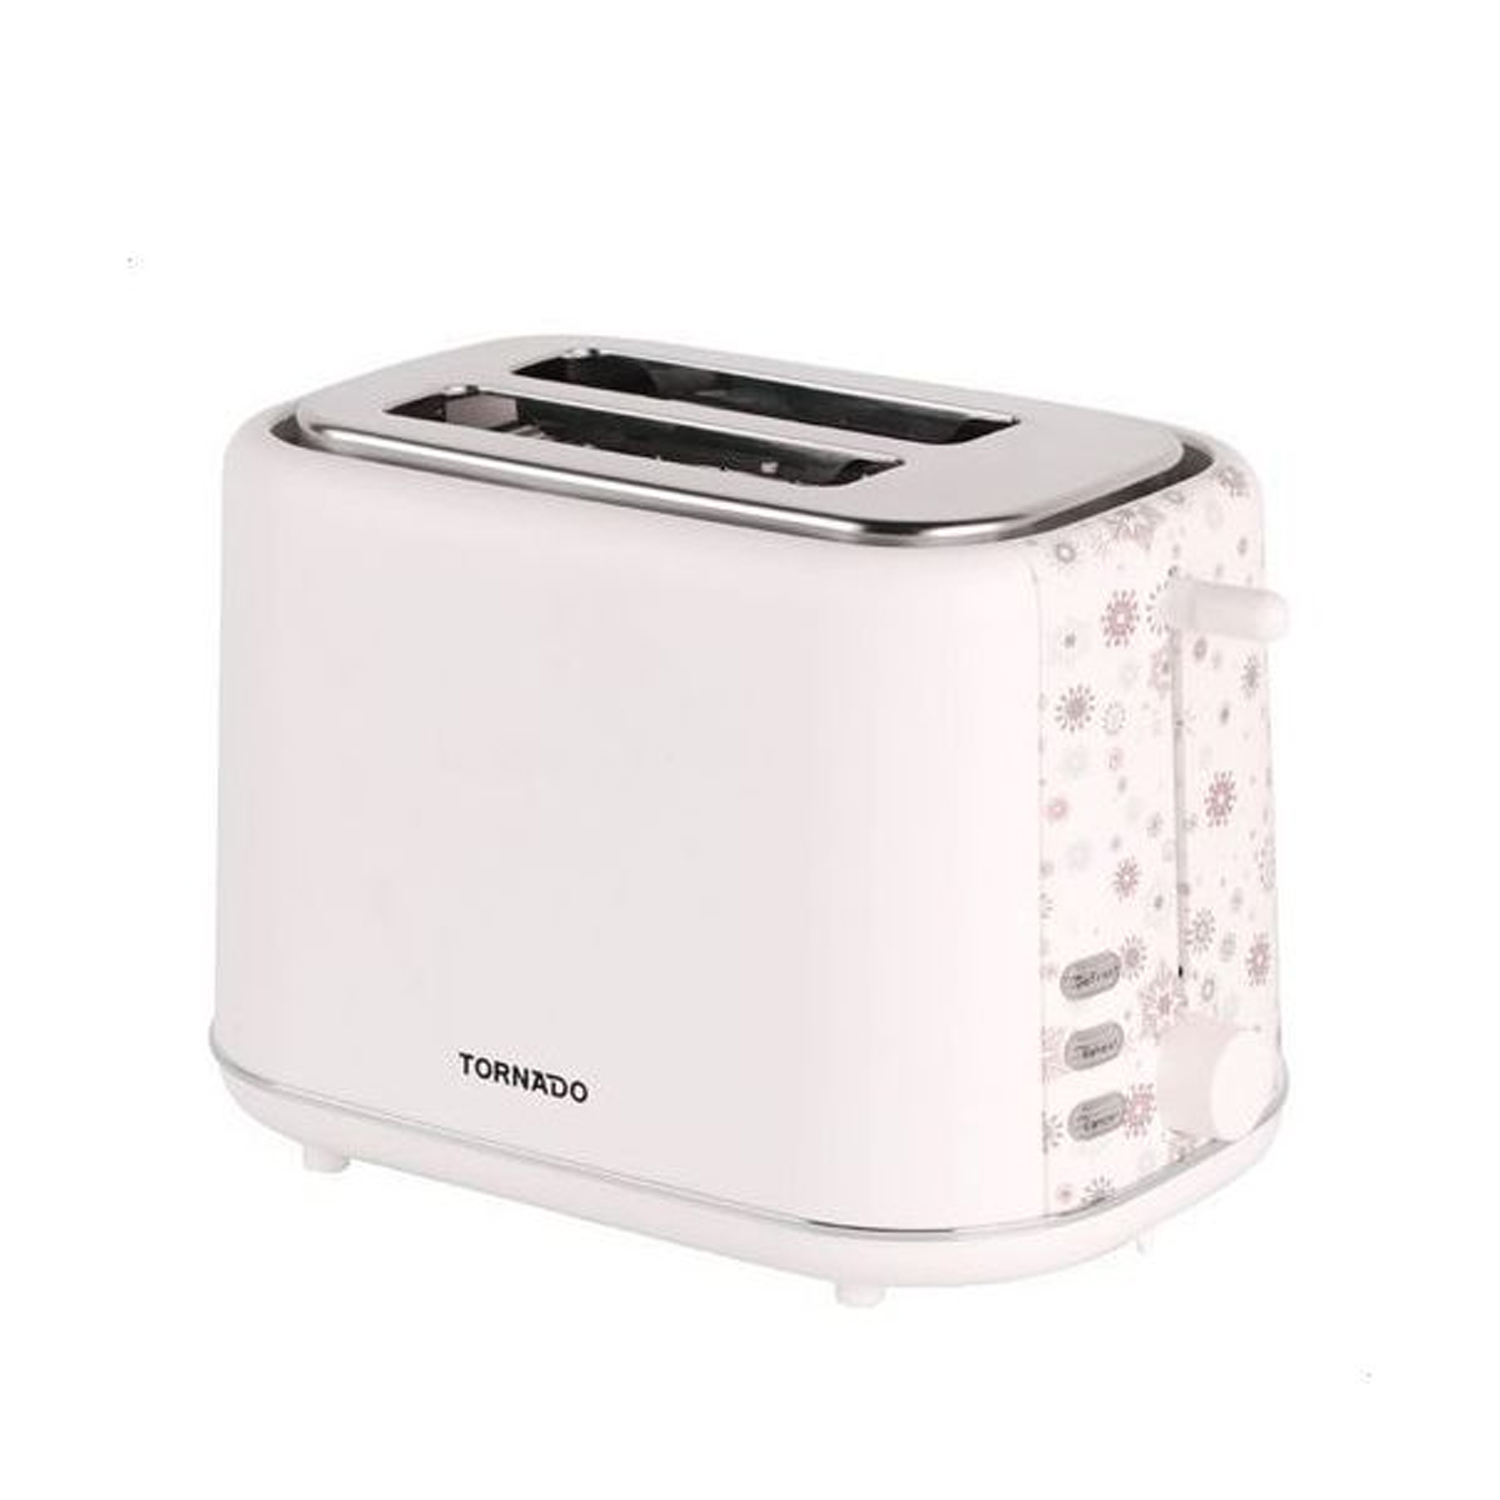 Black And Decker ET124 220 Volt 4-Slice Cool-Touch Toaster For